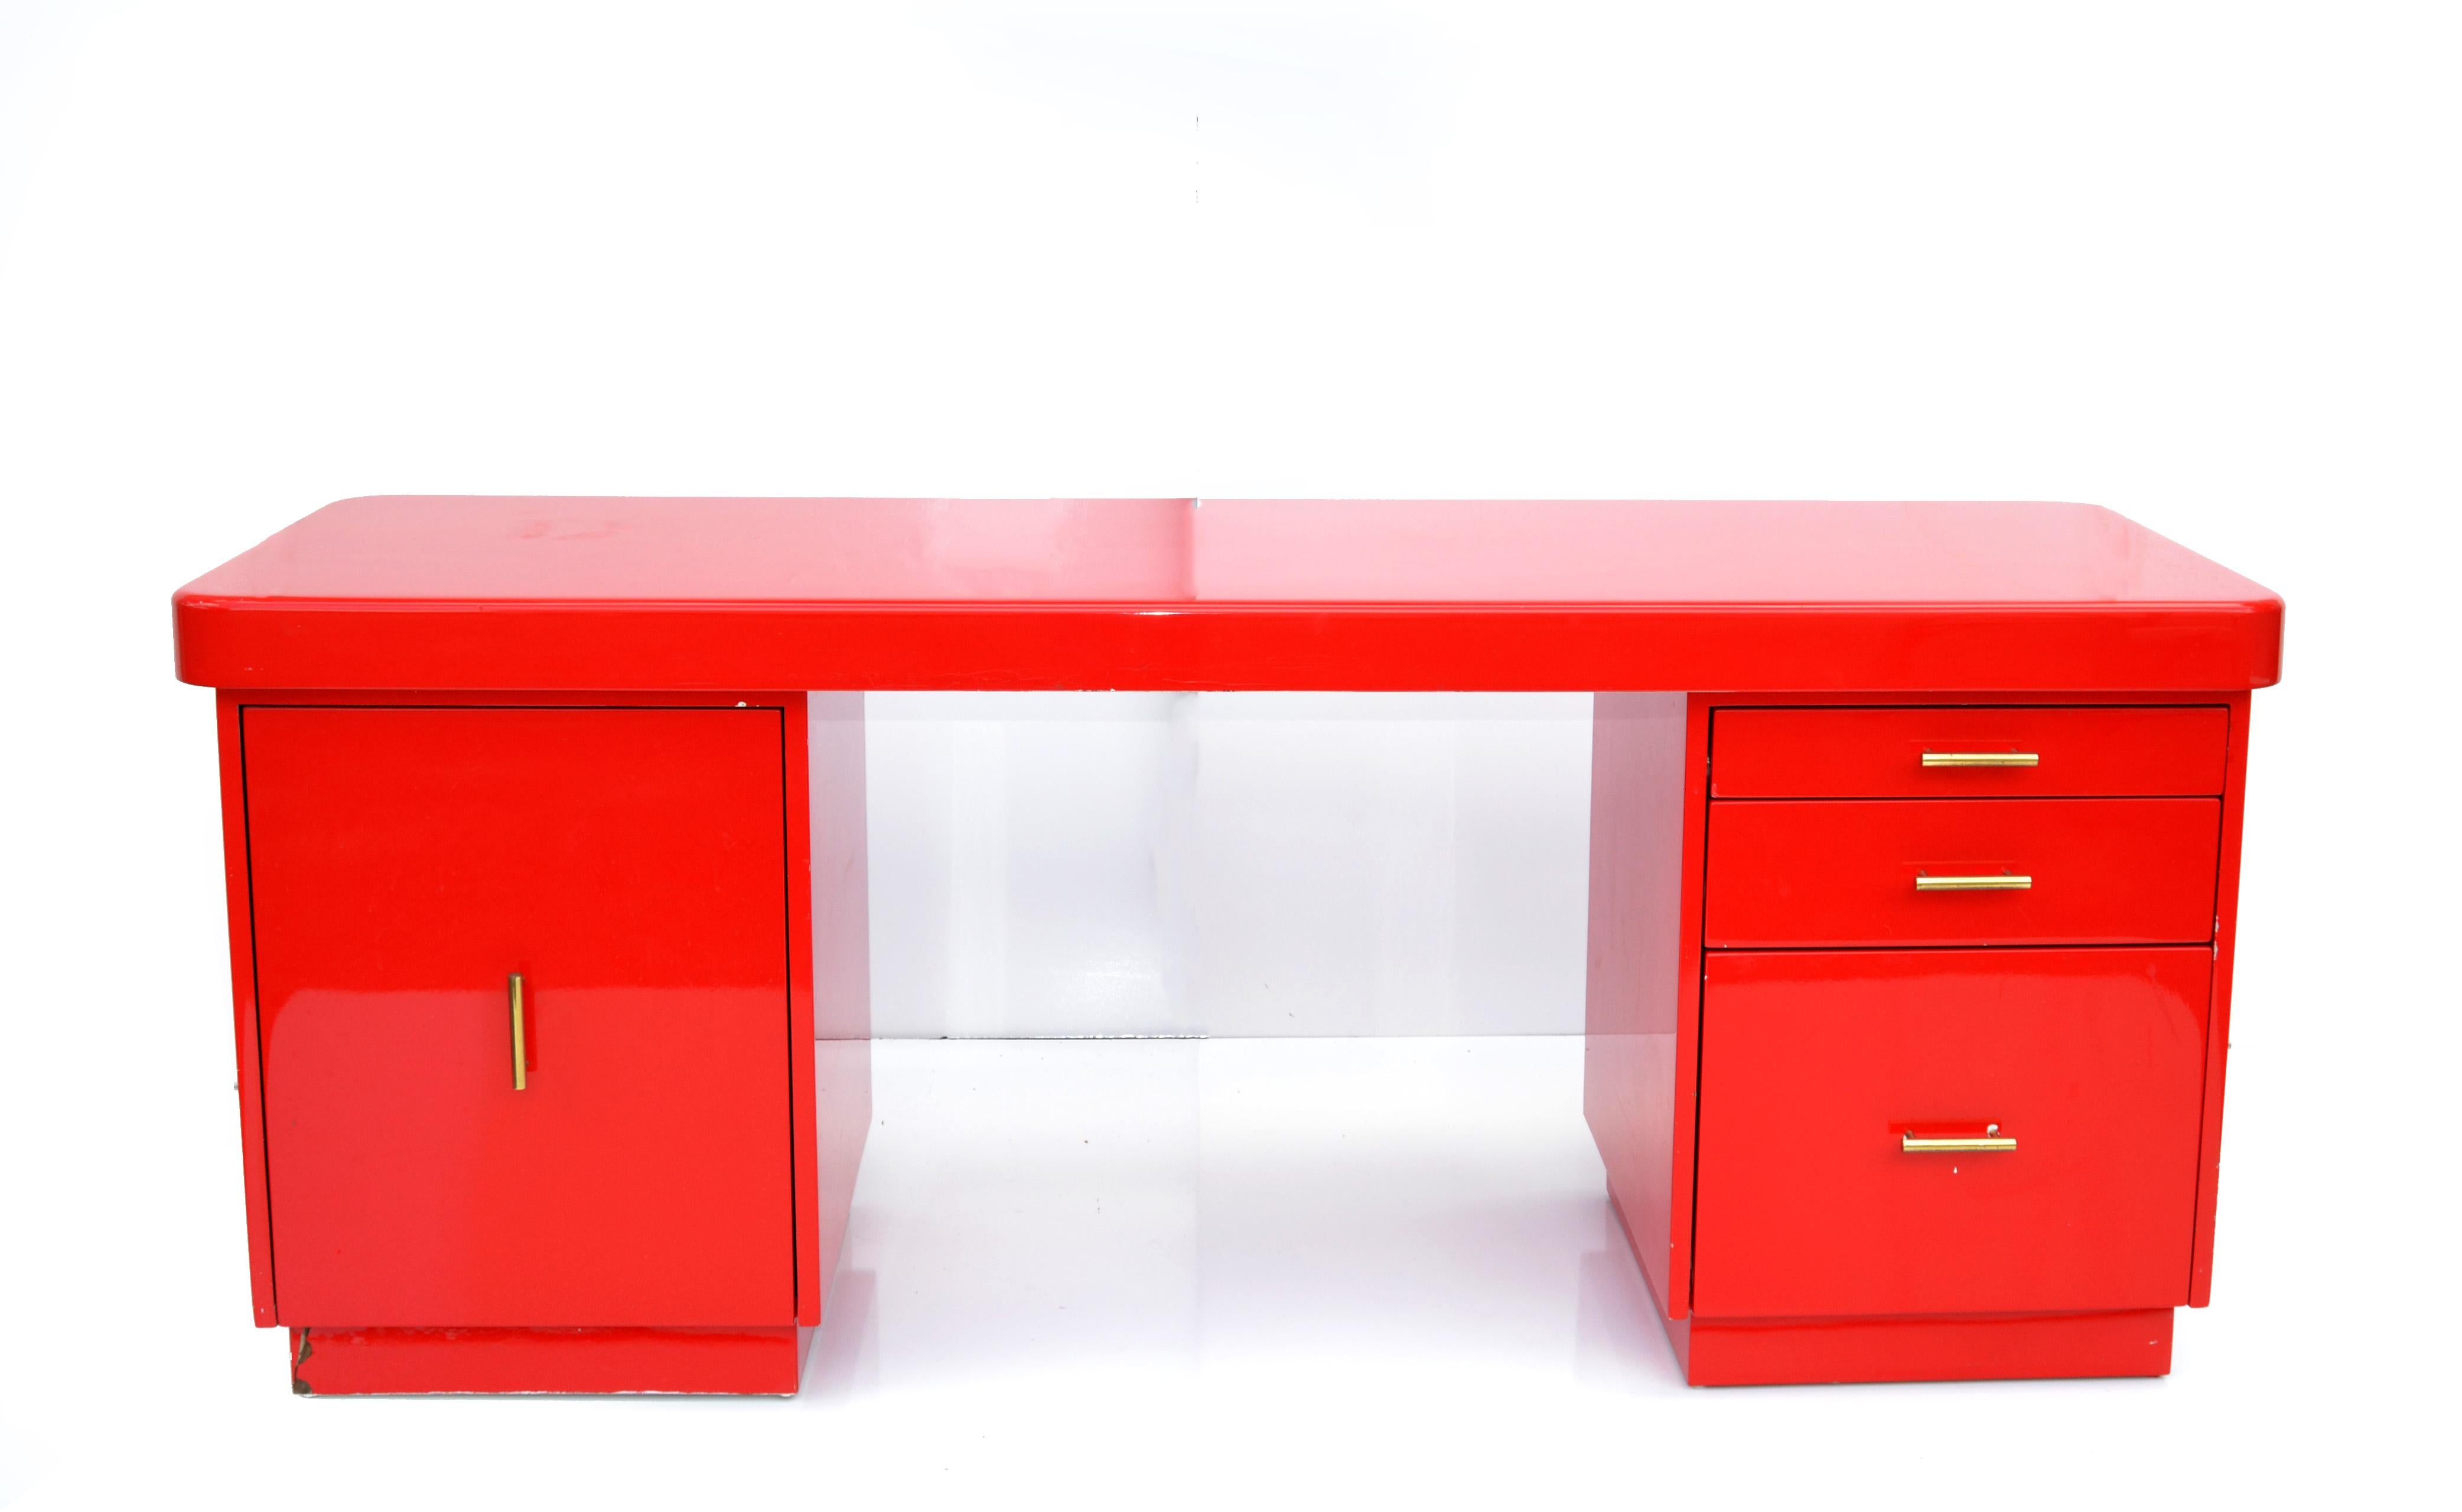 American 1980 red lacquered laminated wood writing table, office or tanker desk with brass hardware and smoked Lucite interior.
The Mid-Century Modern desk comes with a left side door and 3 drawers with storage space for Office supplies.
Measures: